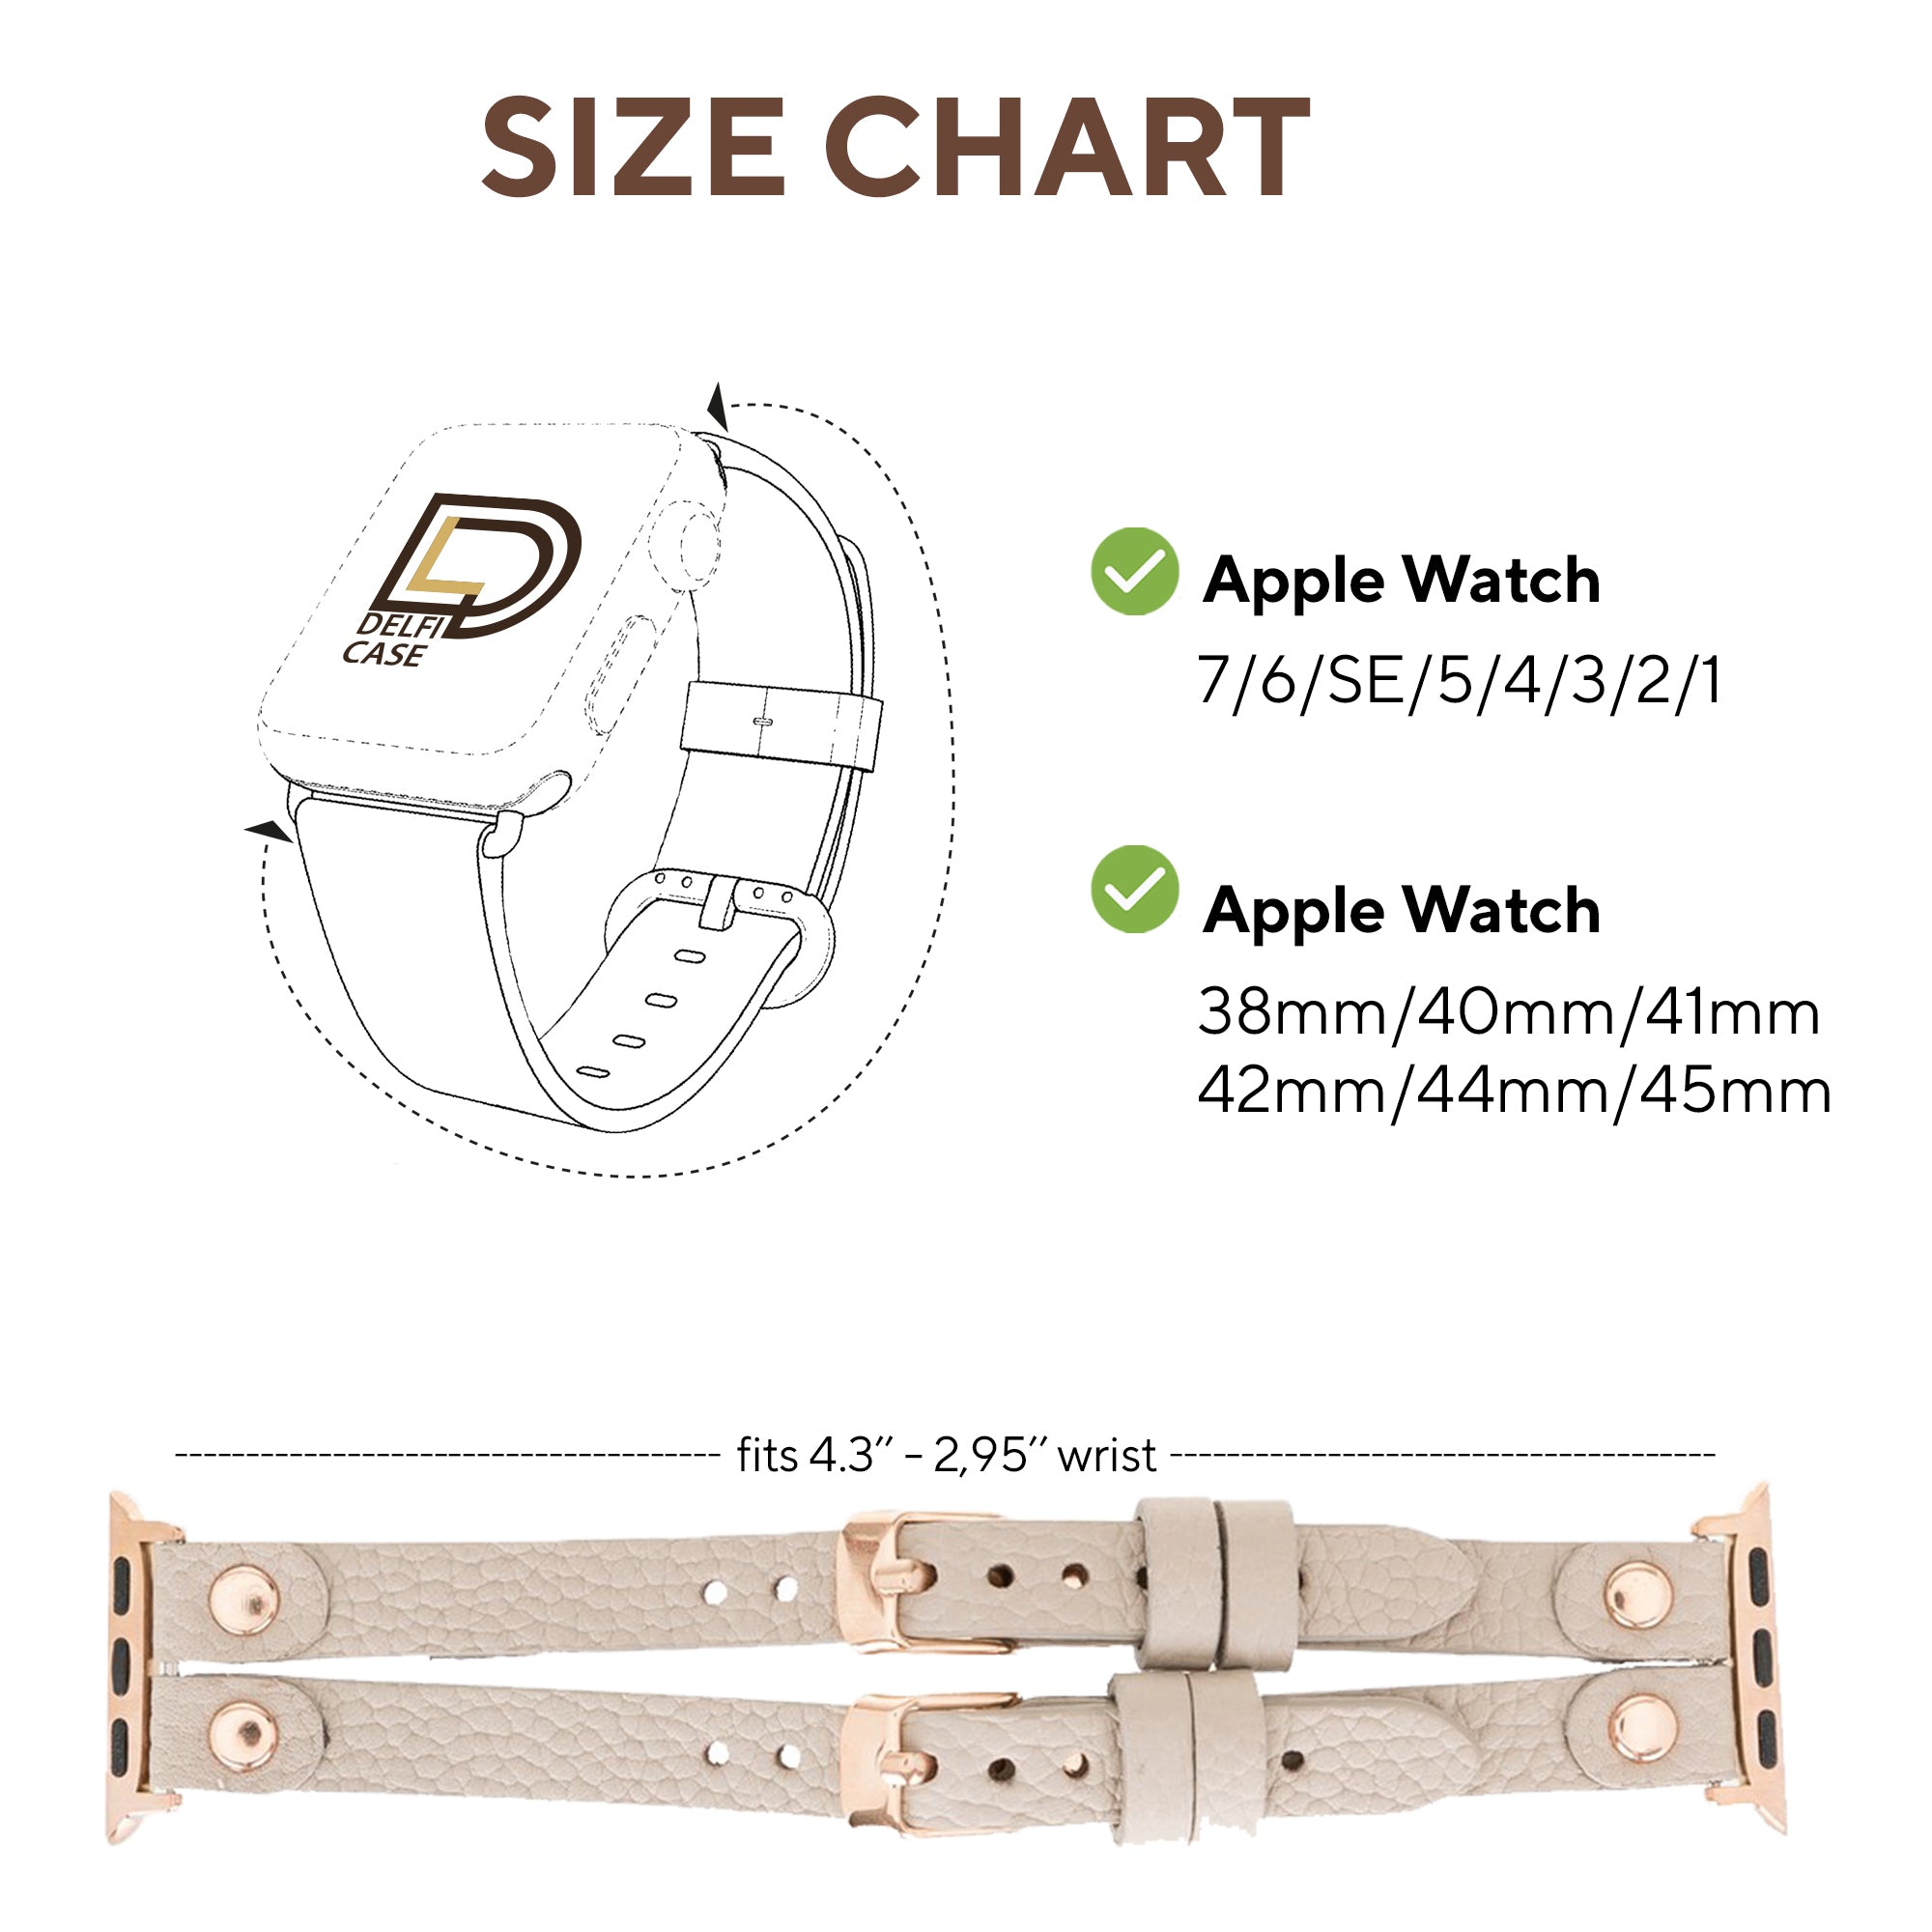 LupinnyLeather ELY Double Watch Band for Apple Watch and Fitbit Versa 3 2 & 1 (Beige) 4